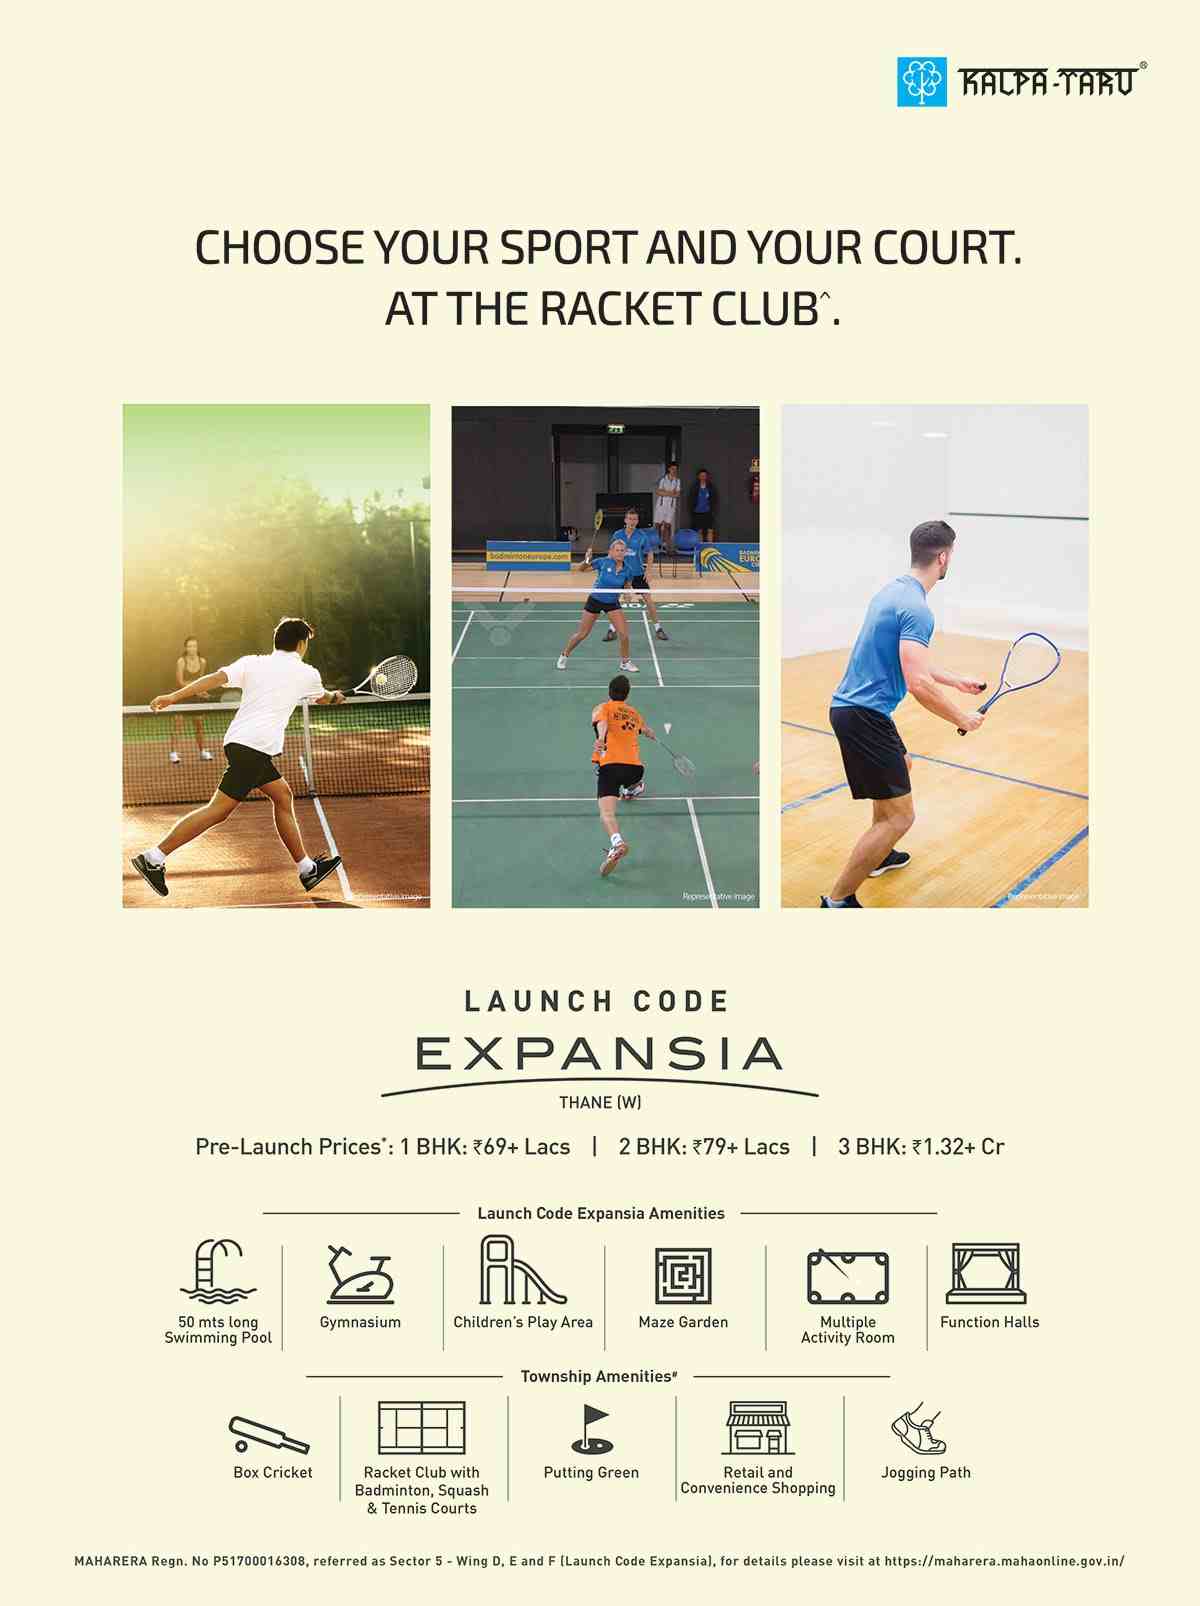 Choose your sport and your court @ the Racket Club at Kalpataru Code Expansia in Mumbai